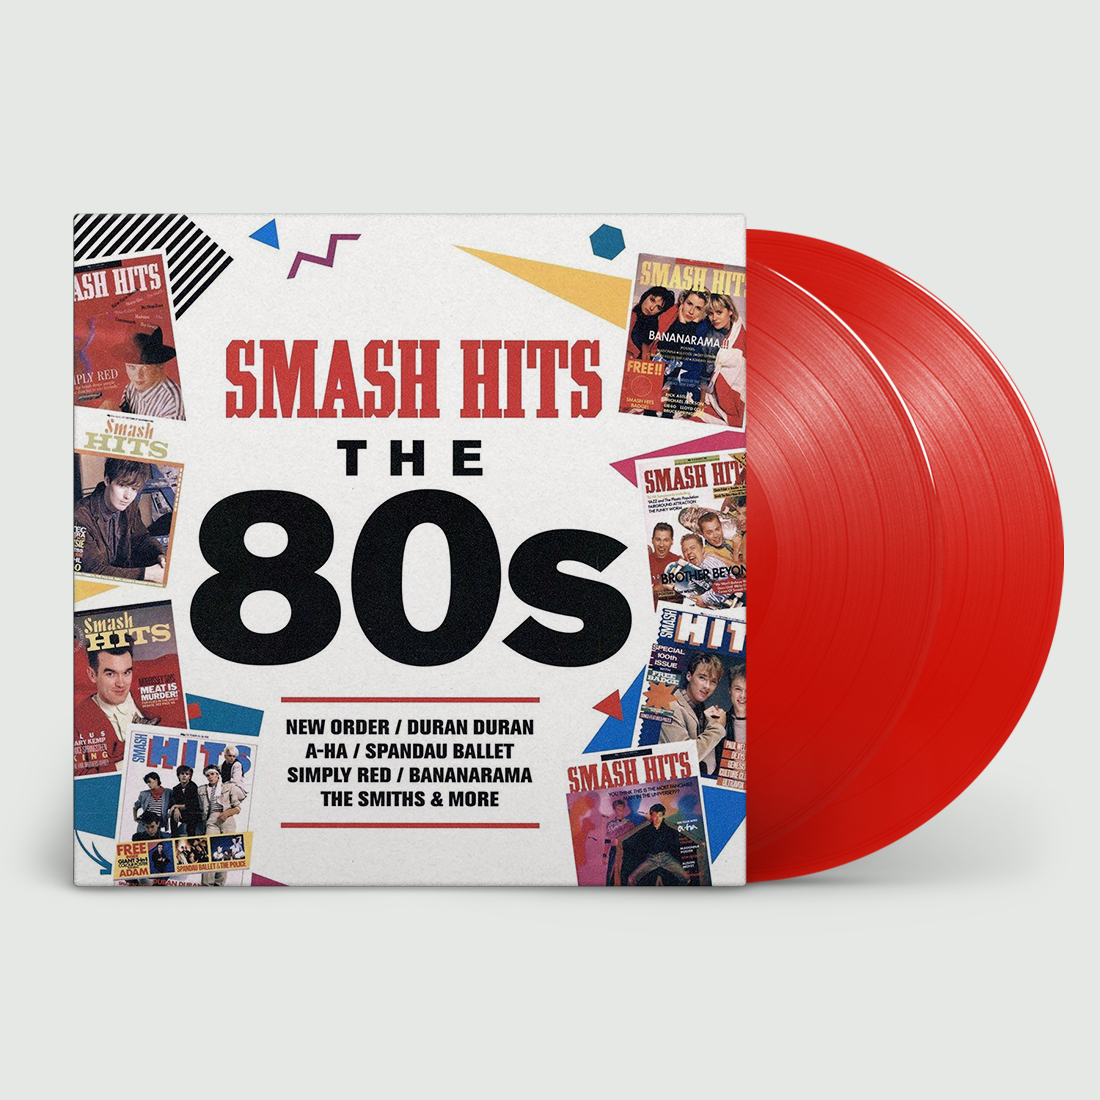 SMASH HITS - The 80s - 2LP - Limited Transparent Red Vinyl [NAD-OCT10]